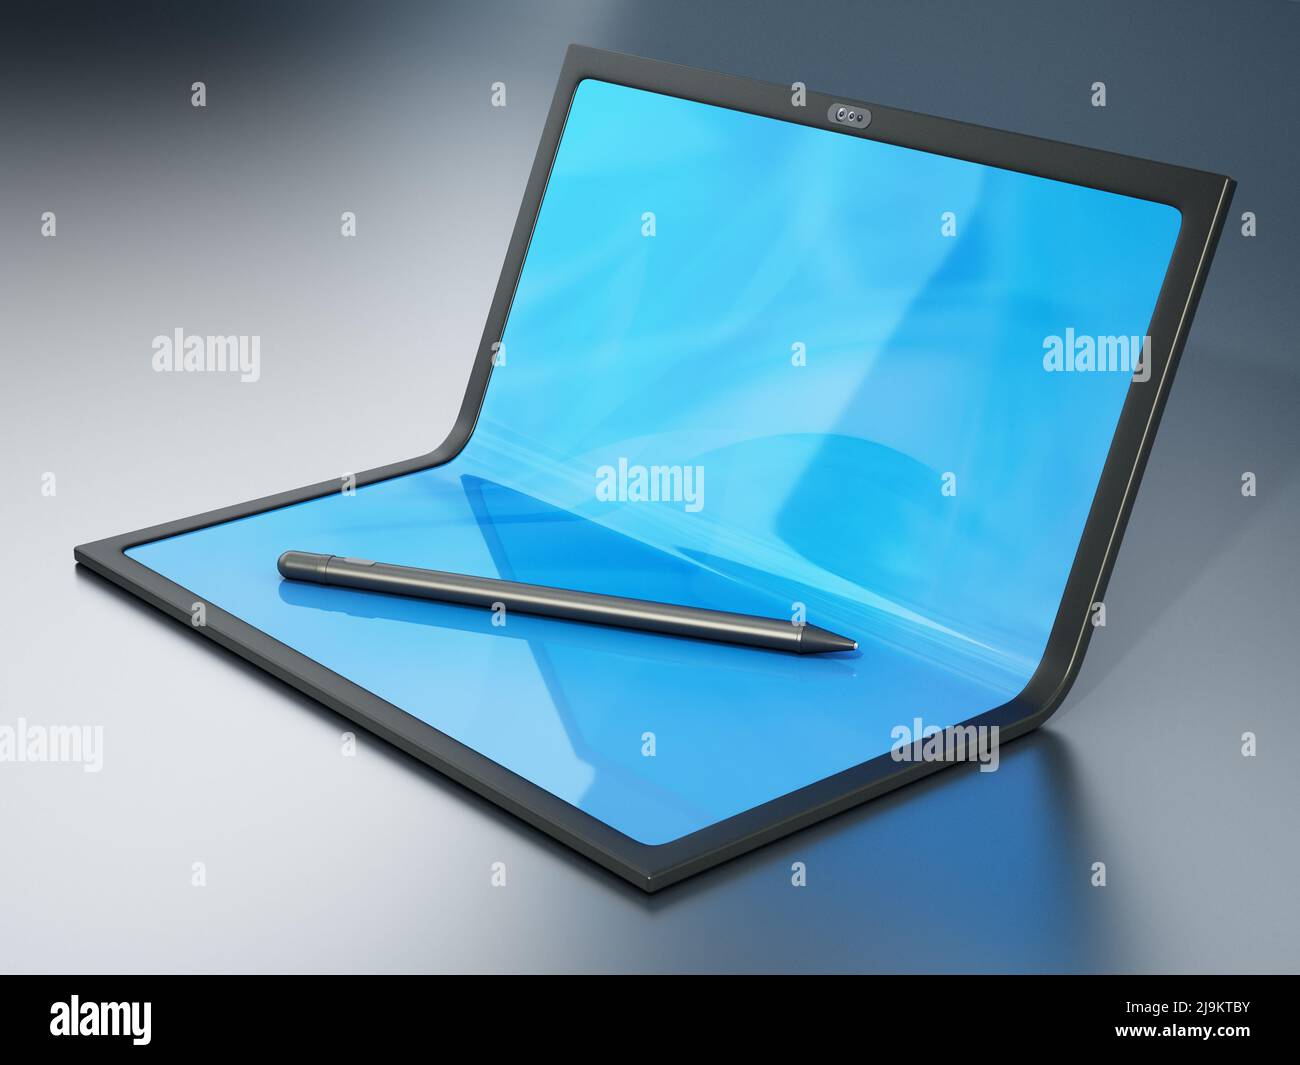 Tablet computer with foldable screen and pen. 3D illustration. Stock Photo